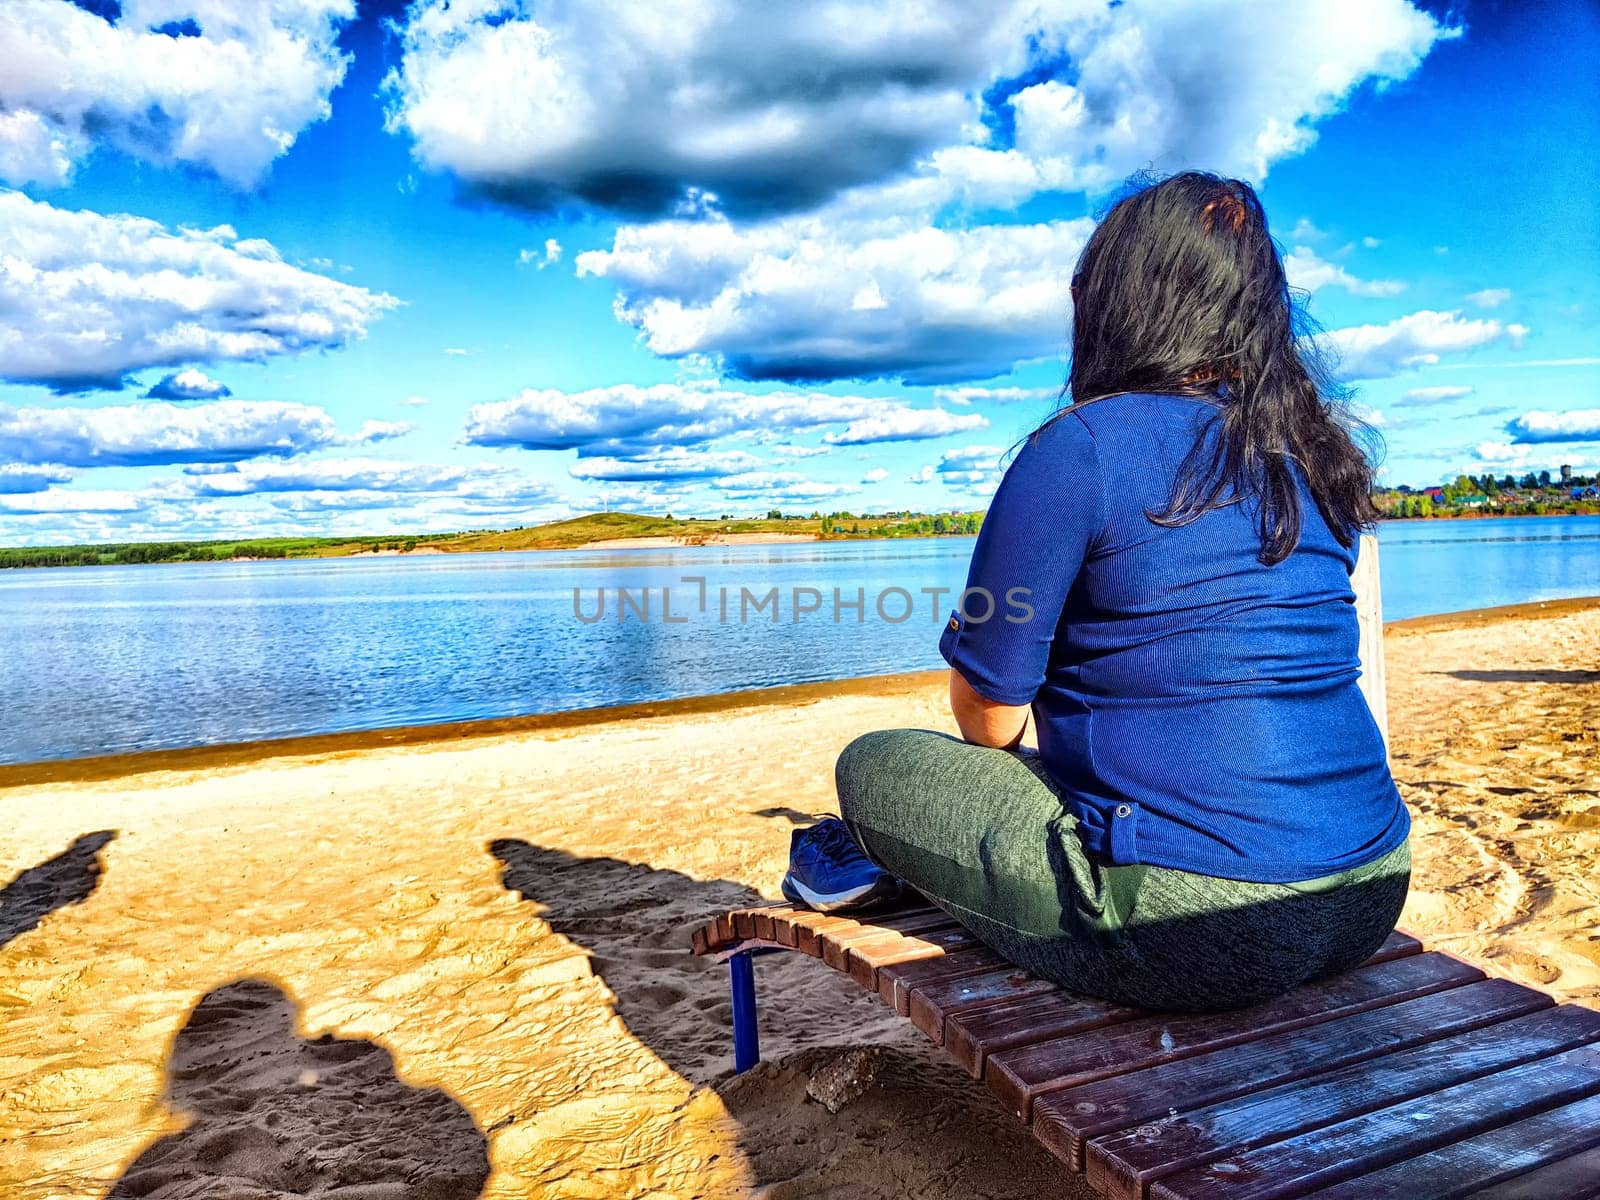 Serene Lakeside Contemplation at Sunset and plump woman. Female Person sitting on bench by a lake, reflecting under a vibrant sky